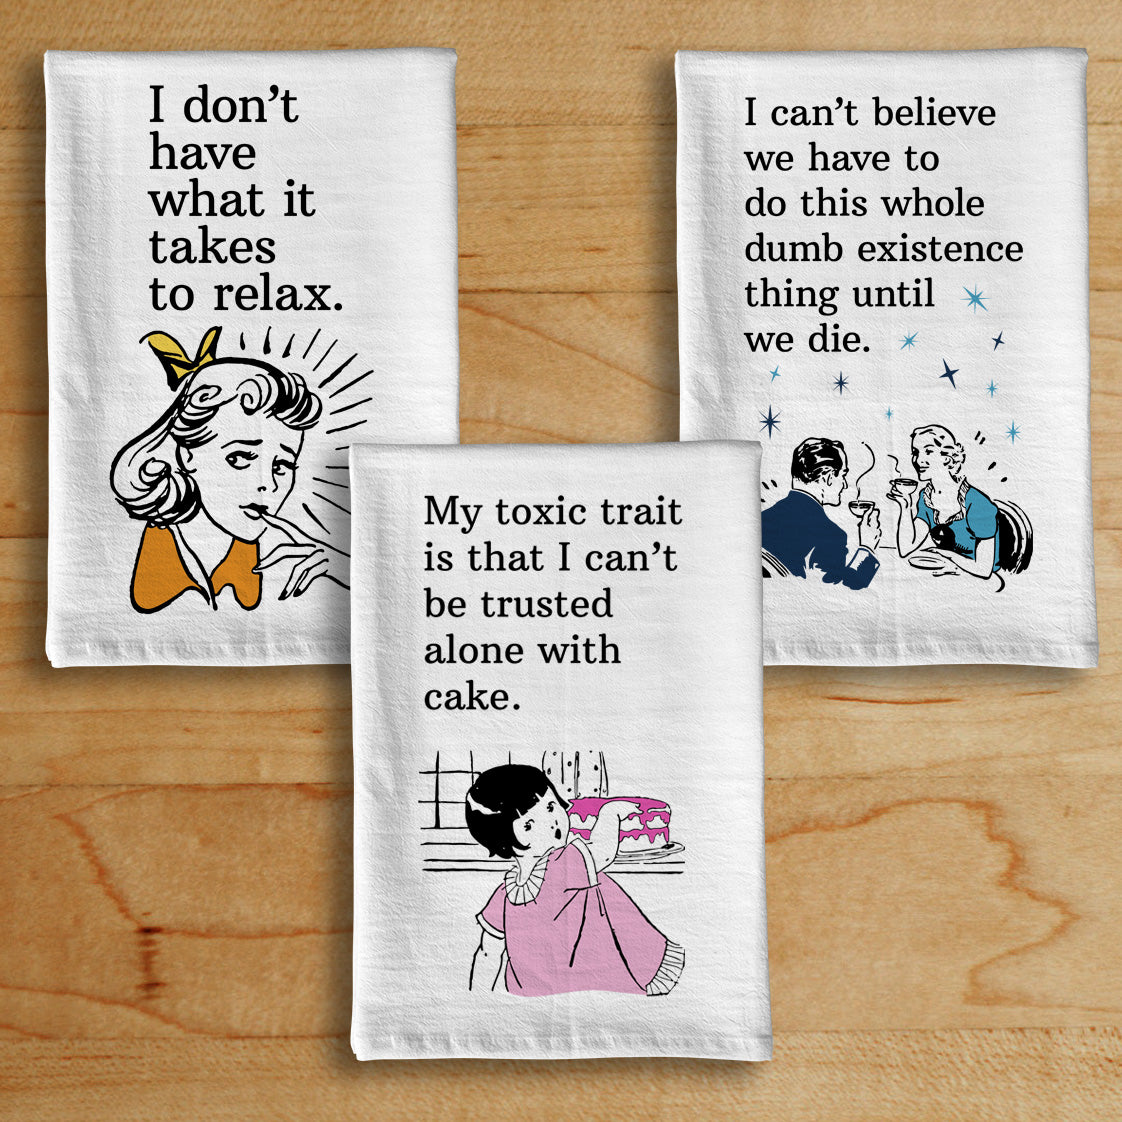 Funny Kitchen Towel Just the Tip to See How It Feels